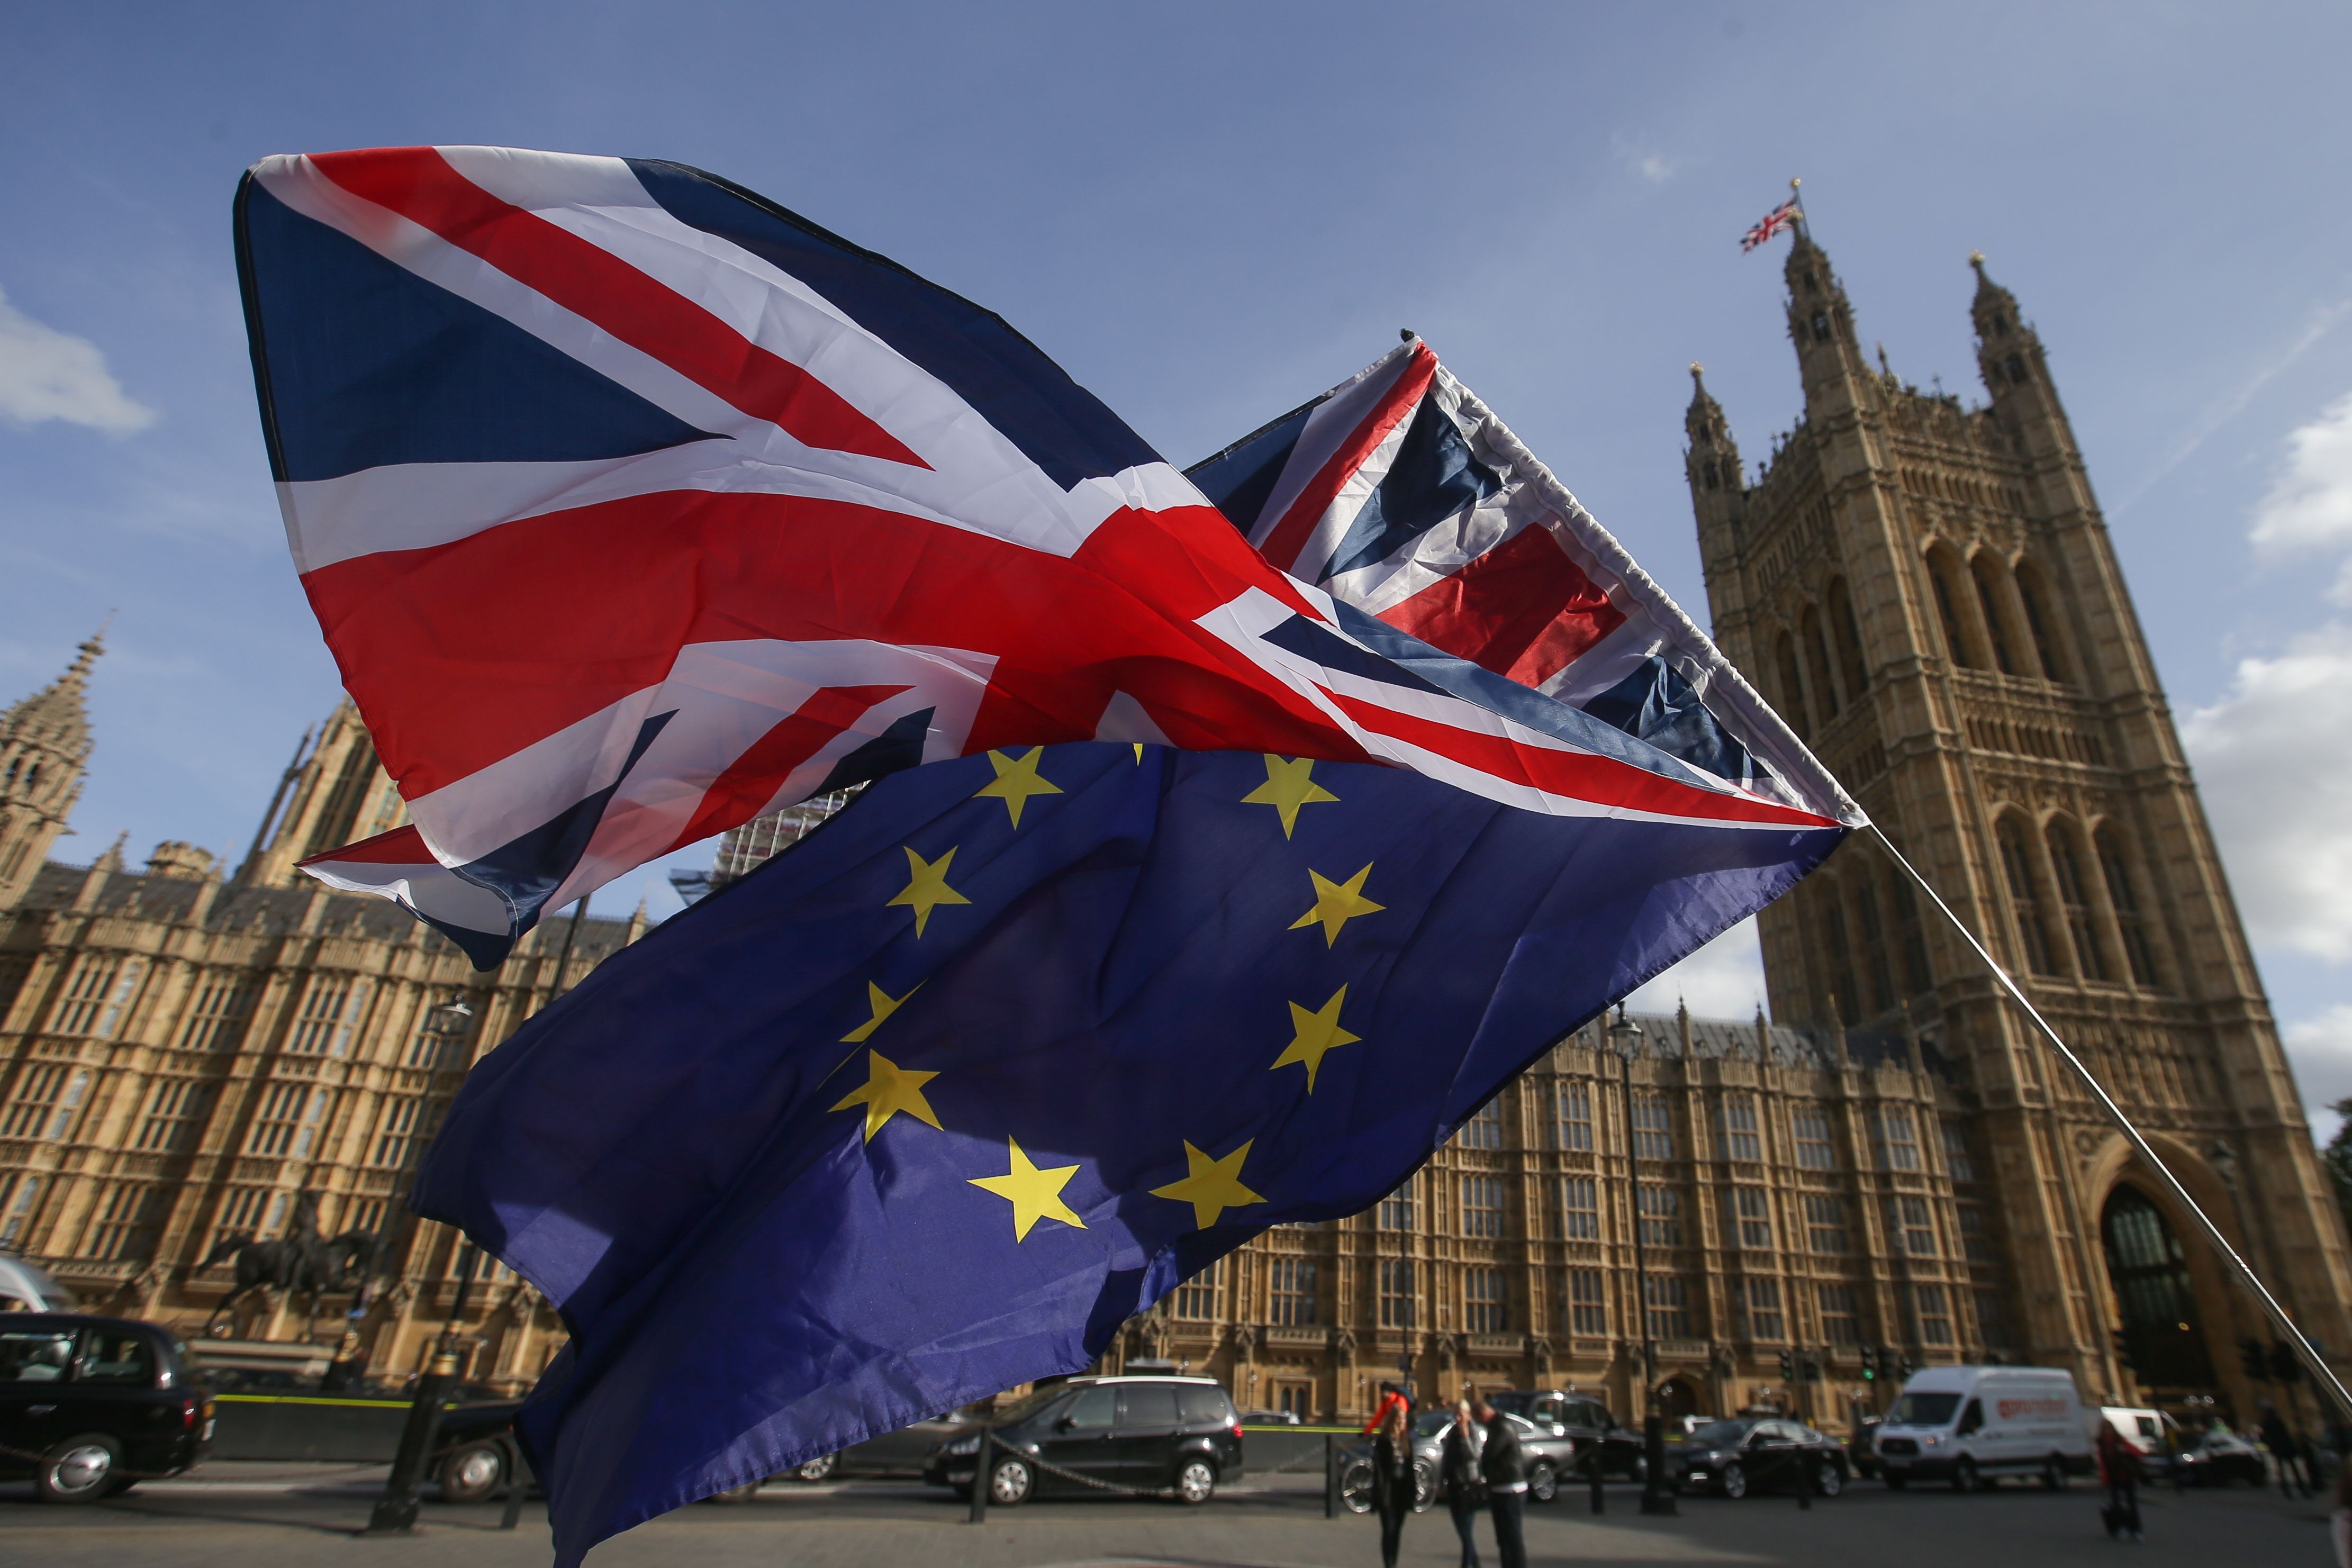 Demonstrators fly a Union Jack flag  and an EU flag outside the Houses of Parliament in Westminster, central London, in October 2017. London has been ranked as the top global financial centre, but its post-Brexit fate remains unclear. Photo: AFP  